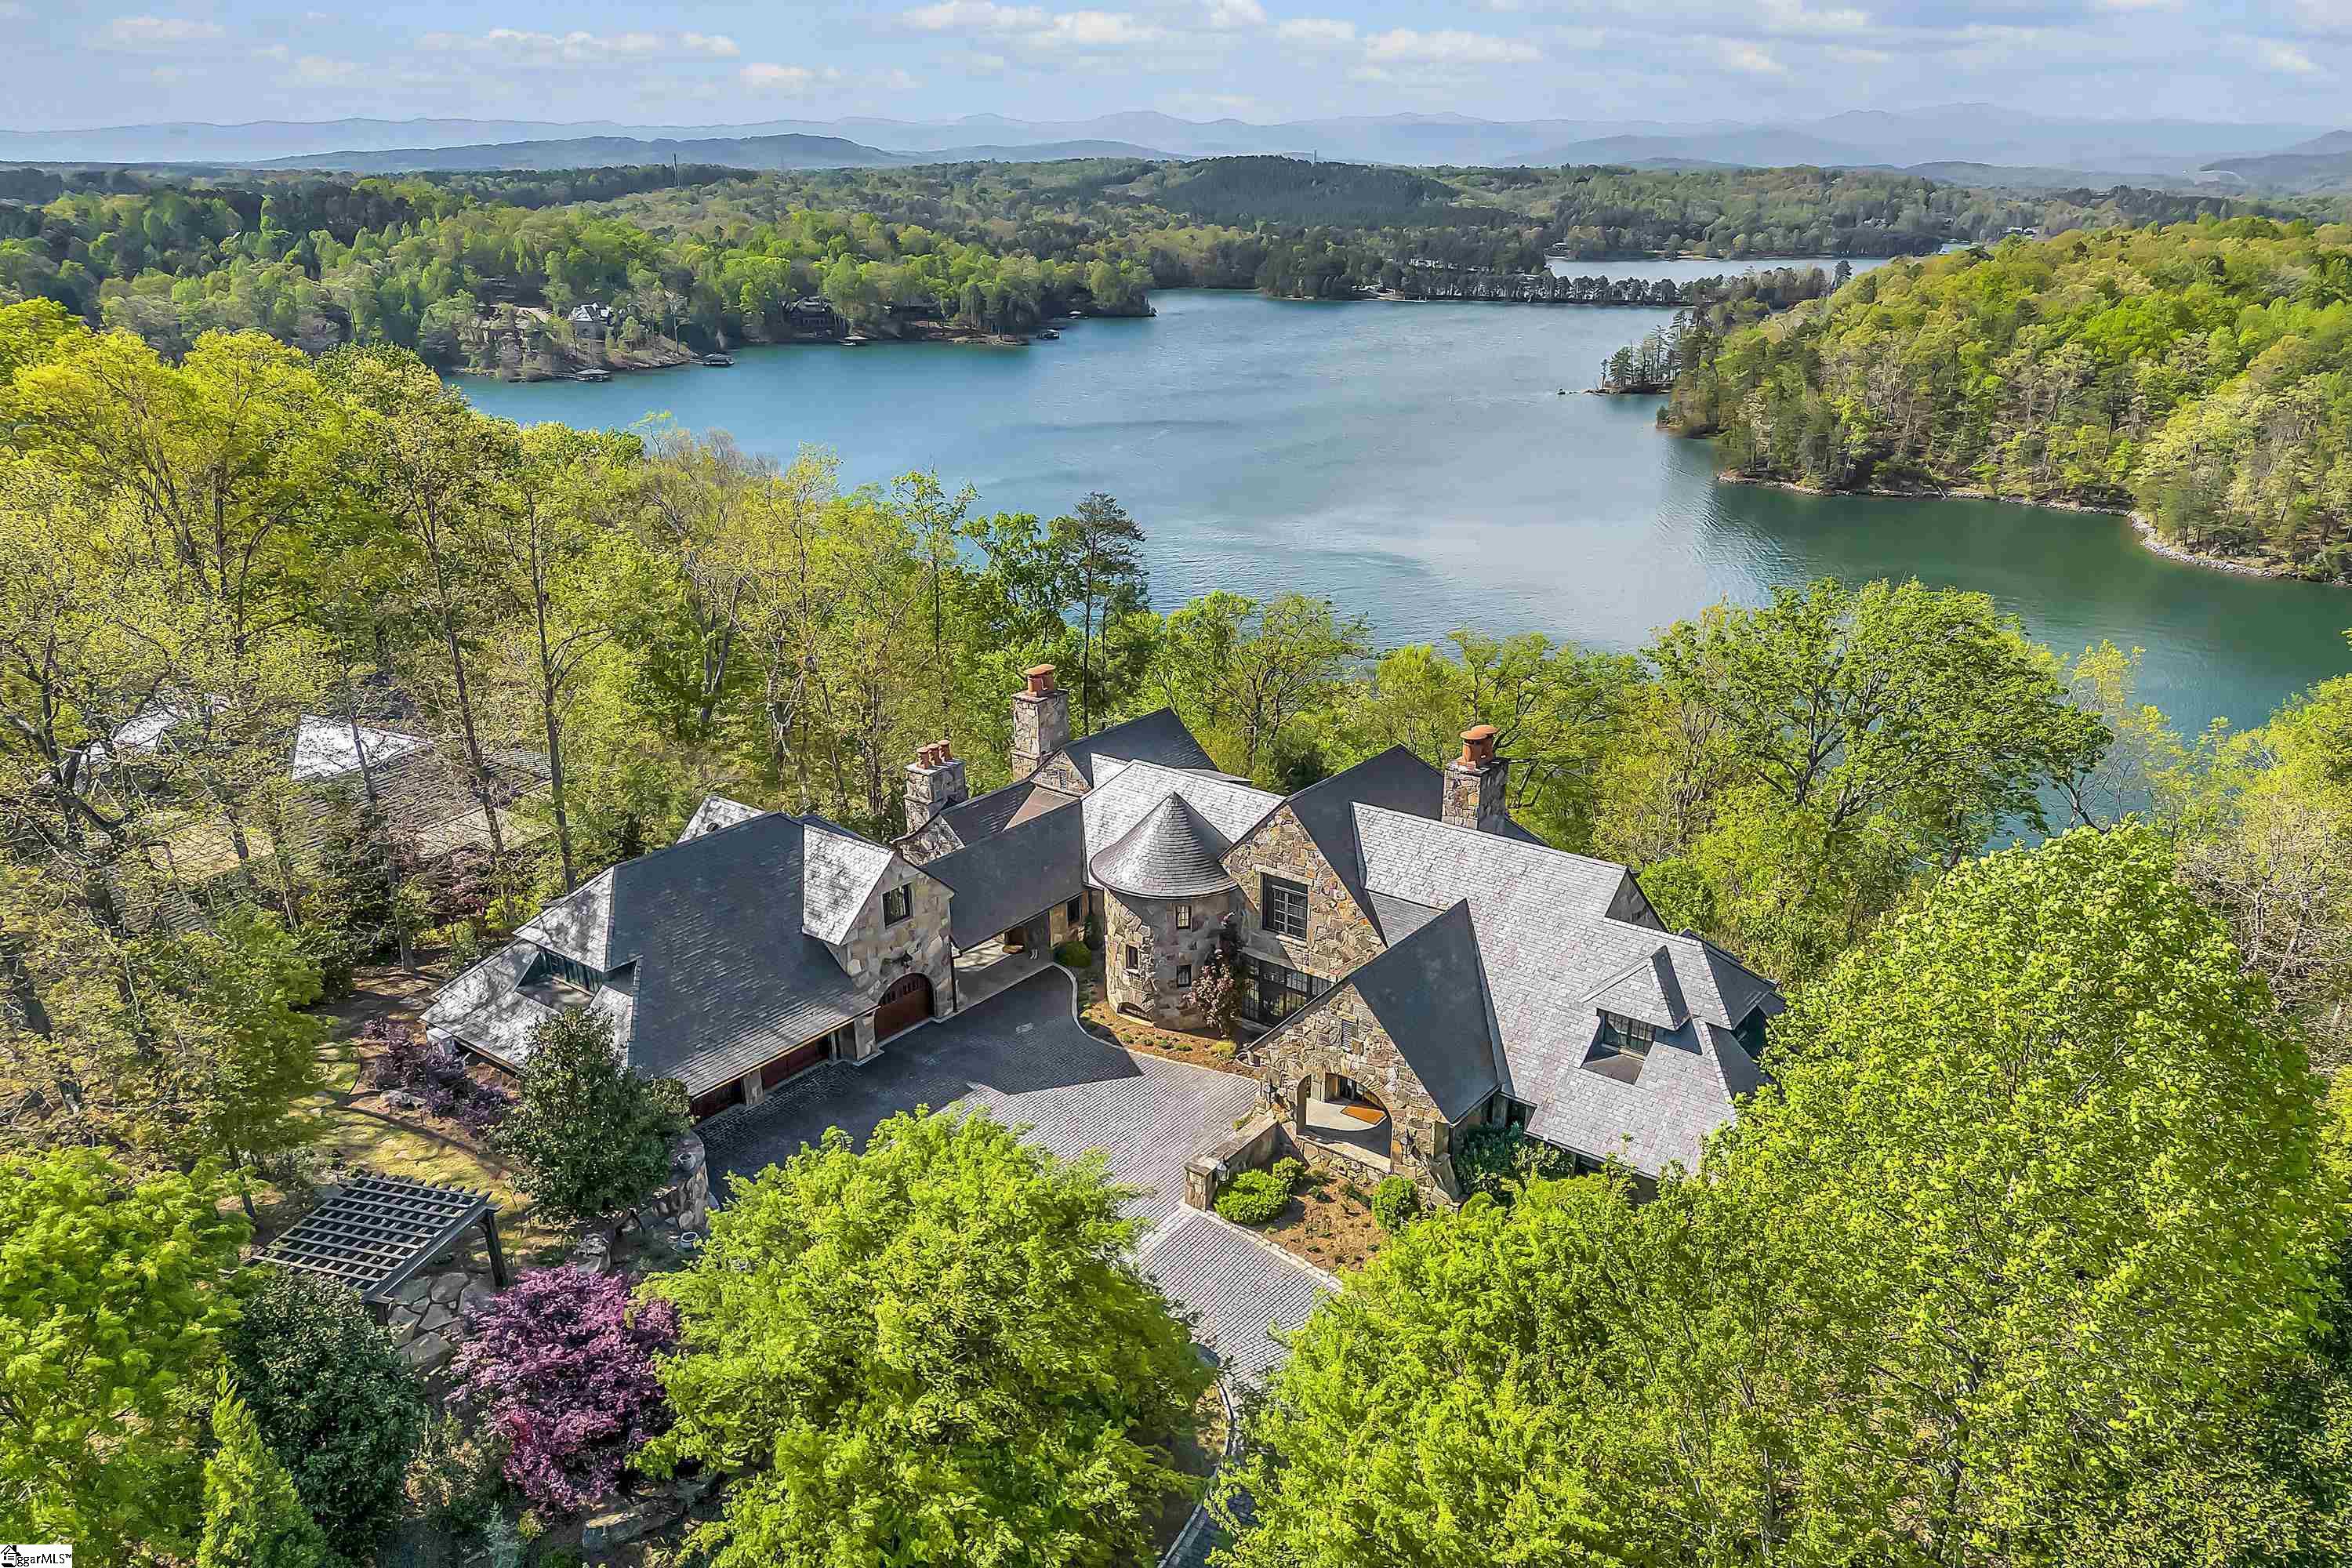 Instantly relax in the tucked away splendor of Stone Vista Manor with open, panoramic water views in The Reserve at Lake Keowee! Driving up the cobblestone courtyard, Stone Vista Manor’s massive stone arches welcome you through the foyer into the main living room that showcases some of the best views of Lake Keowee and the Blue Ridge Mountains.  Designed by Brad Wright and built by Morgan-Keefe Builders, this home is designed to provide special pockets of grandeur to its residents with features like a screened in porch with fireplace, outdoor kitchen, and dining all in one place (the best room in the home!), sleeping porch off the master bedroom, curved wine cellar under the spiral staircase, English pub style den and billiards room, and covered heated swimming pool installed in 2019 with a full bathroom to rinse off just steps away. The interior was thoughtfully curated by ID Studios Interiors in Greenville, with the landscape shaped by Barry Cosgrove Landscaping.  Live at ease in the home’s 4 bedrooms, 6 full baths, 4 half baths, and bunk room that sleeps four. The master includes his and her baths on the main floor with a laundry room just around the corner. Also on the main floor, the high ceilings in the living room feature reclaimed beams from an Ohio Mennonite Farm. The kitchen cabinetry conceals the refrigerator, separate freezer, and first-rate Miele appliances, giving the space a clean and refined look. Off to the side, a mudroom provides room for umbrellas, coats, and extra storage.   The third level holds a separate craft room and separate office, all with built-in storage for supplies, files, and more, and the home’s elevator allows seamless access to all three floors.   On the lower level, you’ll find an inlaid compass at the base of the stairs next to the wine cellar before entering the English pub and billiards room. Lofty ceilings feature reclaimed Cypress from the Everglades and more expansive views of the lake. Built for entertainment, the lower level also hosts a separate sitting room, full kitchen, and full bath where downstairs guests can make themselves right at home with access to the covered, heated swimming pool that overlooks the lake.  The detached 3 bay garage offers plenty of space for your vehicles or working space and includes a half bath. A carriage house apartment is above the garage, perfectly suited for a caregiver, housekeeper, or guests.   Stone Vista Manor makes for an ideal retreat for those who appreciate quality, custom craftsmanship and attention to detail. With stone arches inside and out, a slate roof, exterior mahogany doors, Morgan Creek Cabinets, and accents from Charles Calhoun Design & Metal Works, this home is built to last and serve your luxury lifestyle.   Positioned on 1.34 acres with tons of outdoor space, you’ll love living in the incomparable Reserve at Lake Keowee which offers over $100 million in world-class amenities: Jack Nicklaus Signature Golf Course, Orchard Clubhouse with fine dining, Fitness Center, Several Hiking Trails, Har-Tru Clay Tennis Courts at the Tennis Center plus Lawn Tennis on the Great Lawn, Pool and Cabana, Settlement Village Pool Pavilion, Pickleball Courts, Marina, and Village Market for casual dining. A Reserve membership, offering access to these world class amenities, is available for purchase with the home.  Get to the lake in under two minutes with your own full Kroeger Marine covered Dock and Tram access, enjoy the beautiful waters of Lake Keowee all year round.